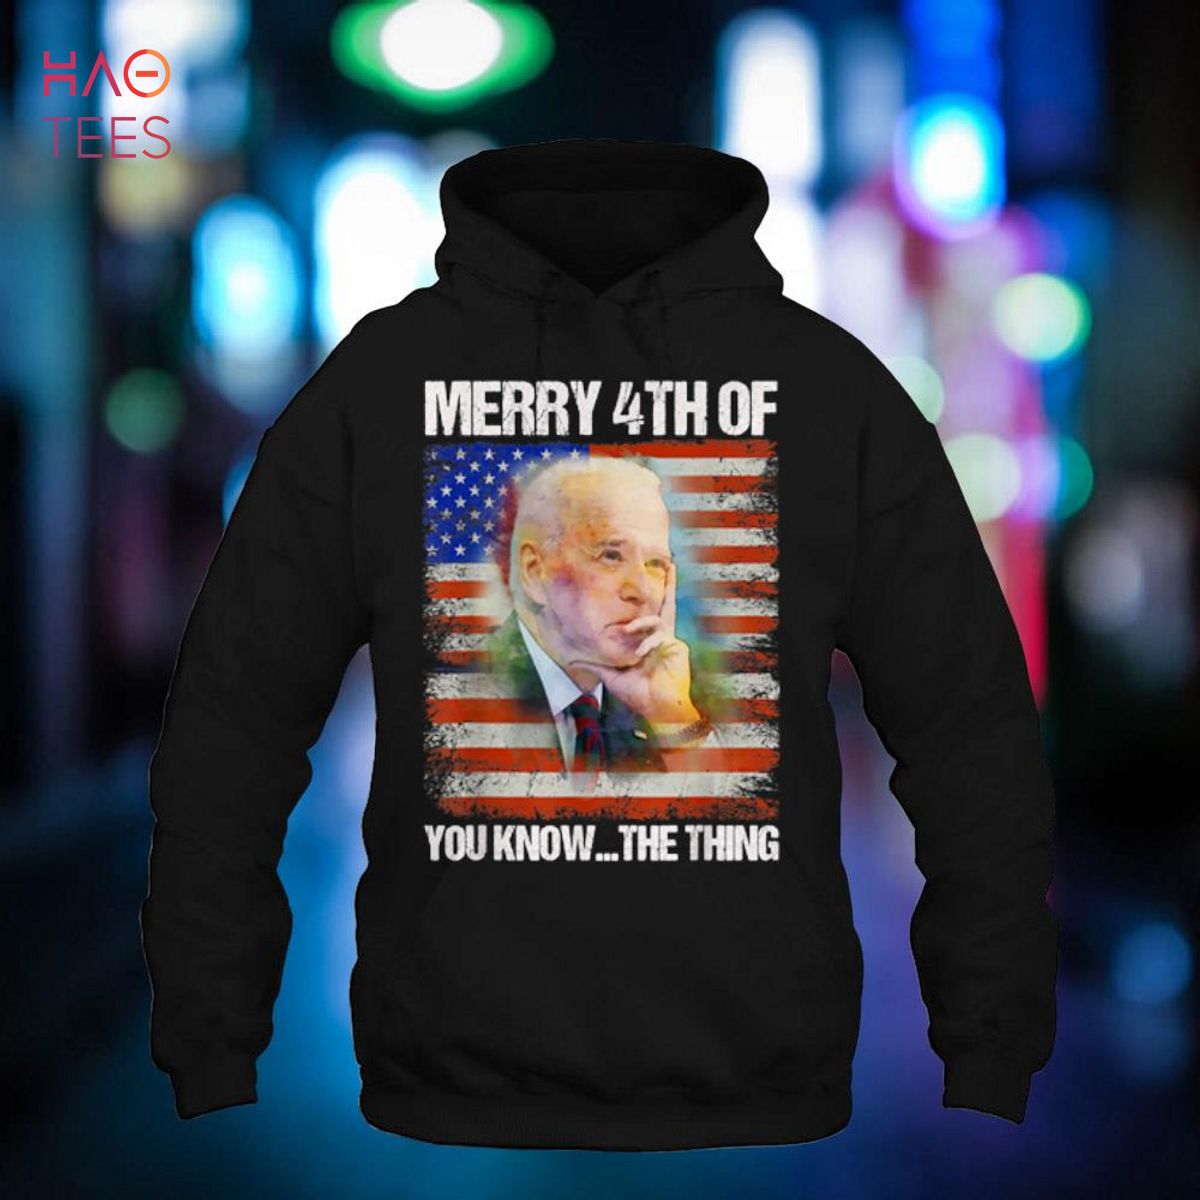 Biden Dazed Merry 4th of You Know…The Thing Funny Biden Shirt